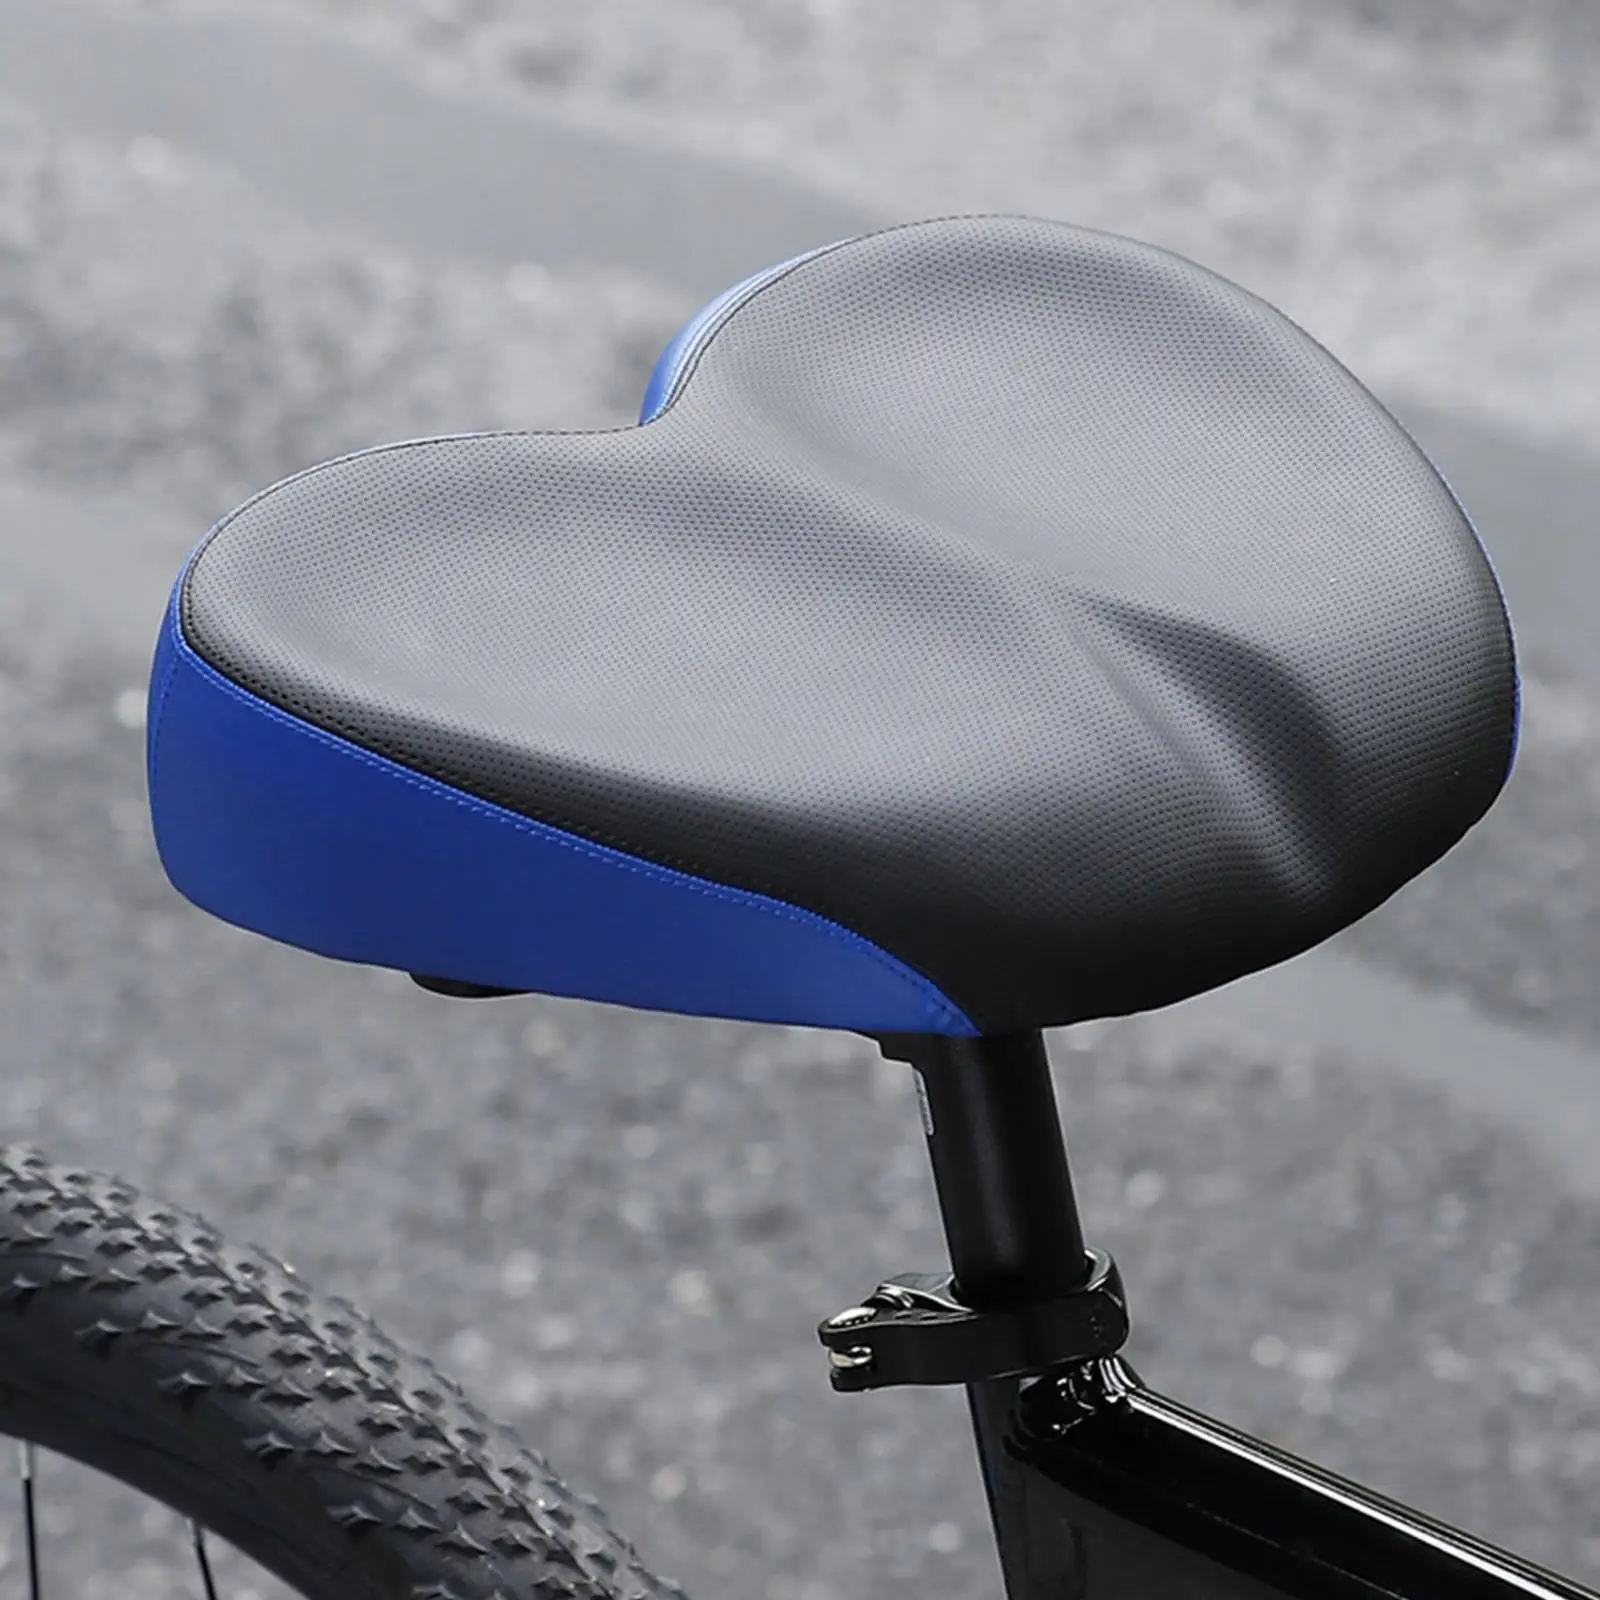 Biking Ergonomic Bicycle Saddle Soft Widen Thicken Cushion For Long Distance Riding Mtb Road Bike Comfortable Cycling Seat